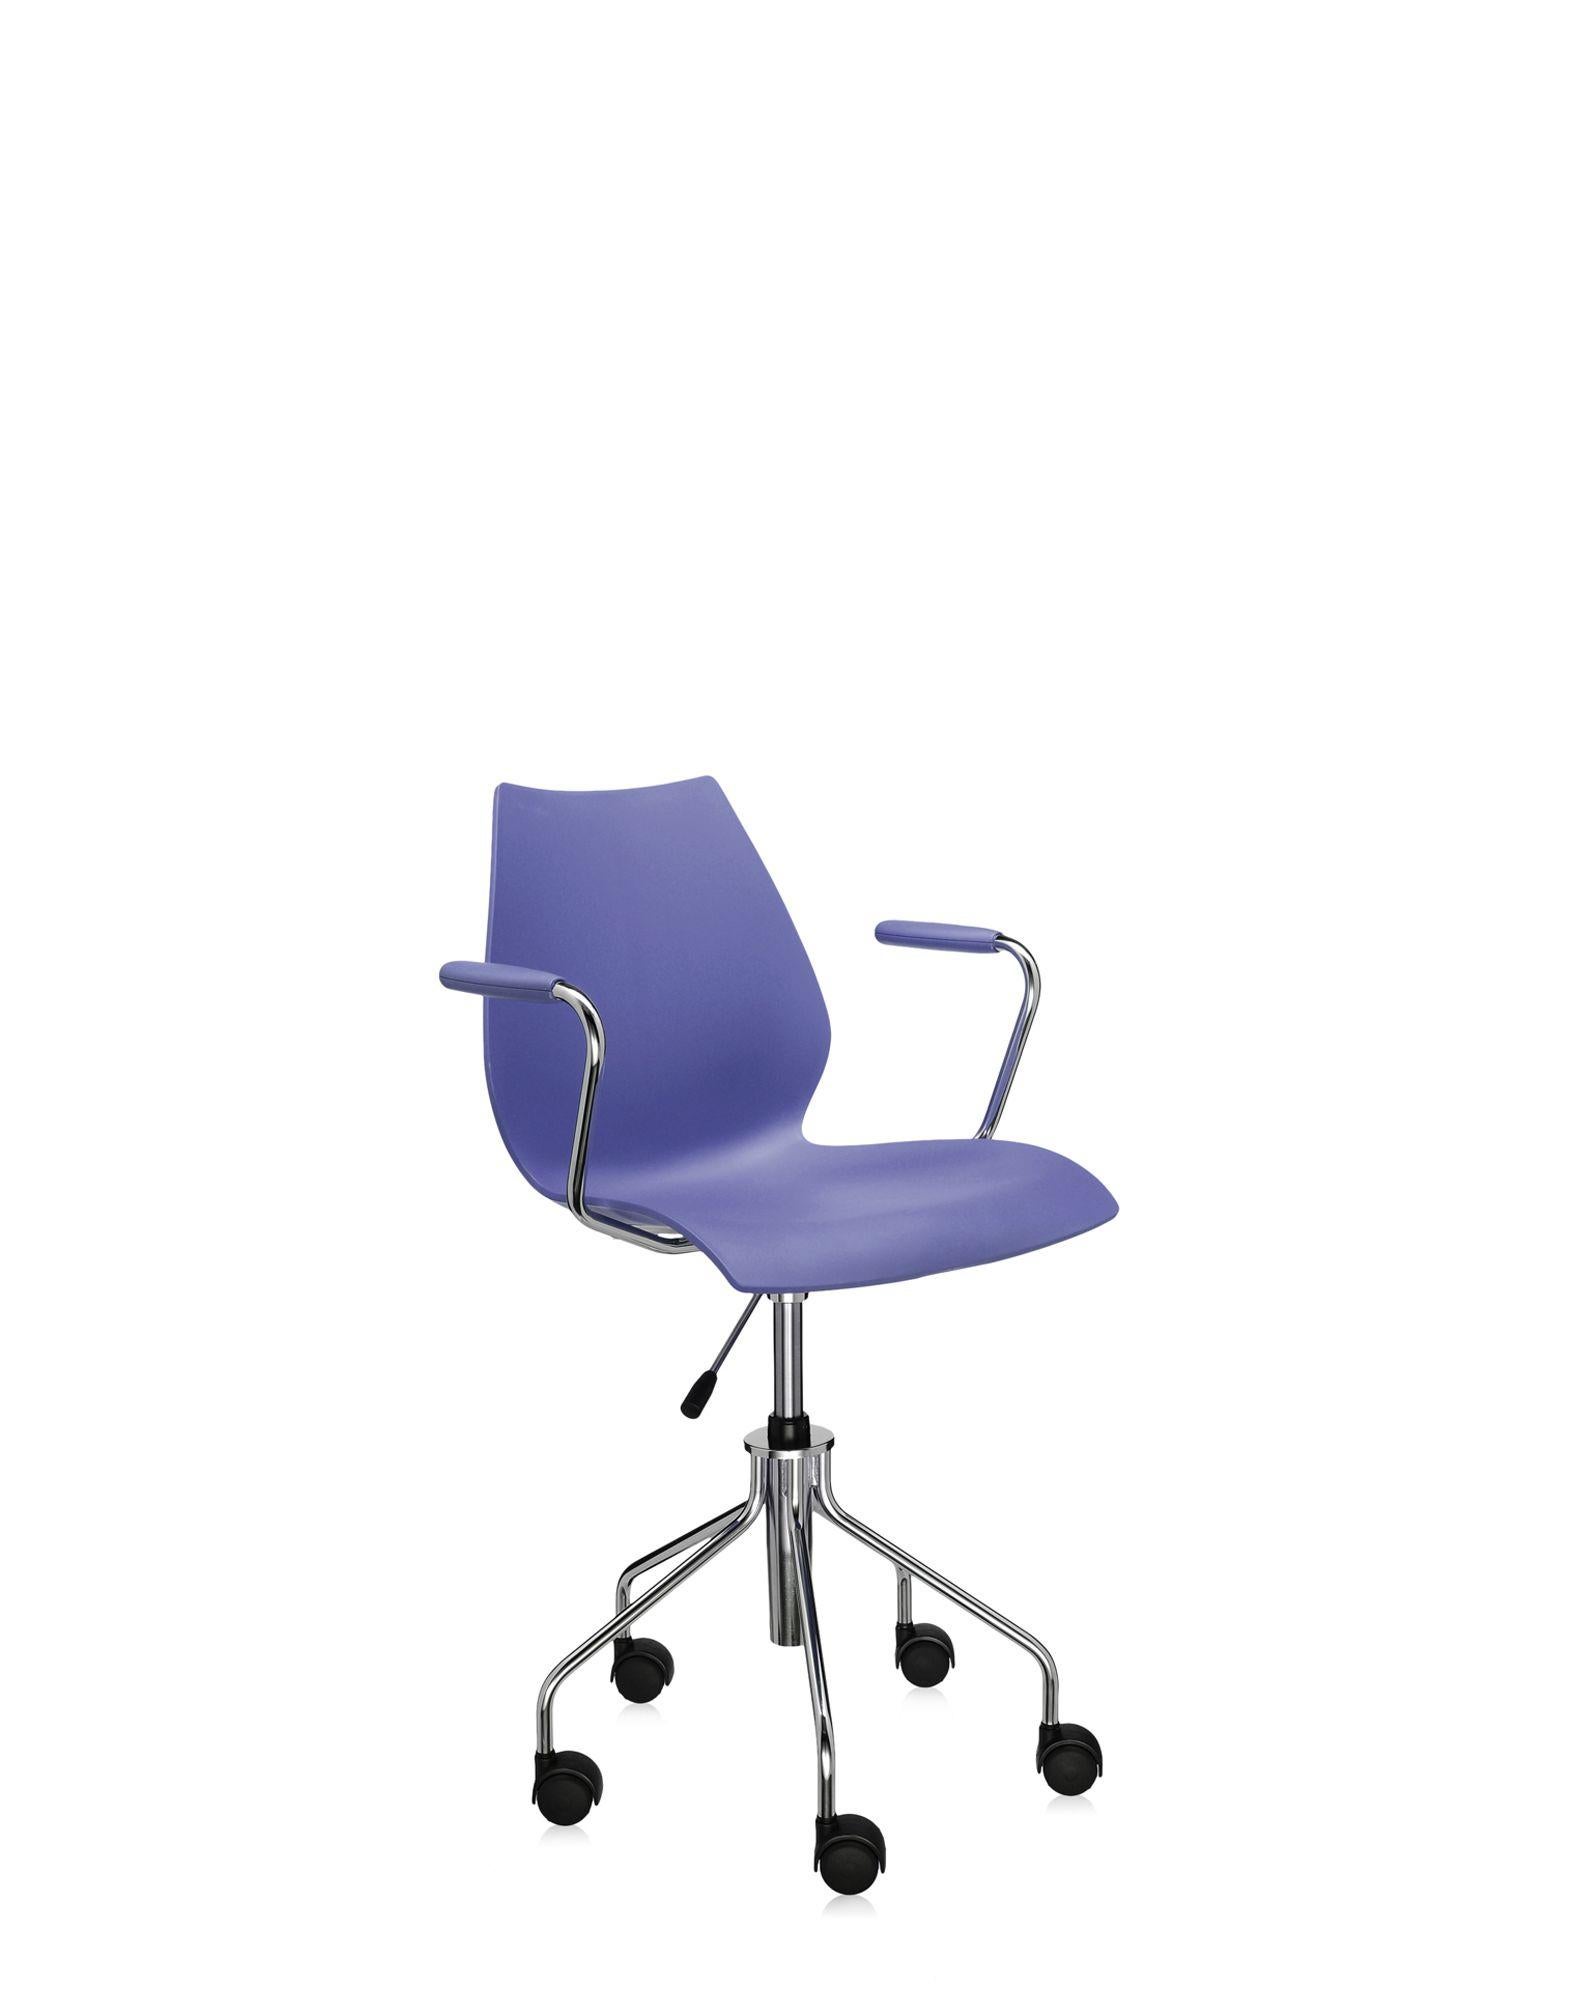 Modern Kartell Maui Swivel Chair Adjustable in Navy Blue by Vico Magistretti